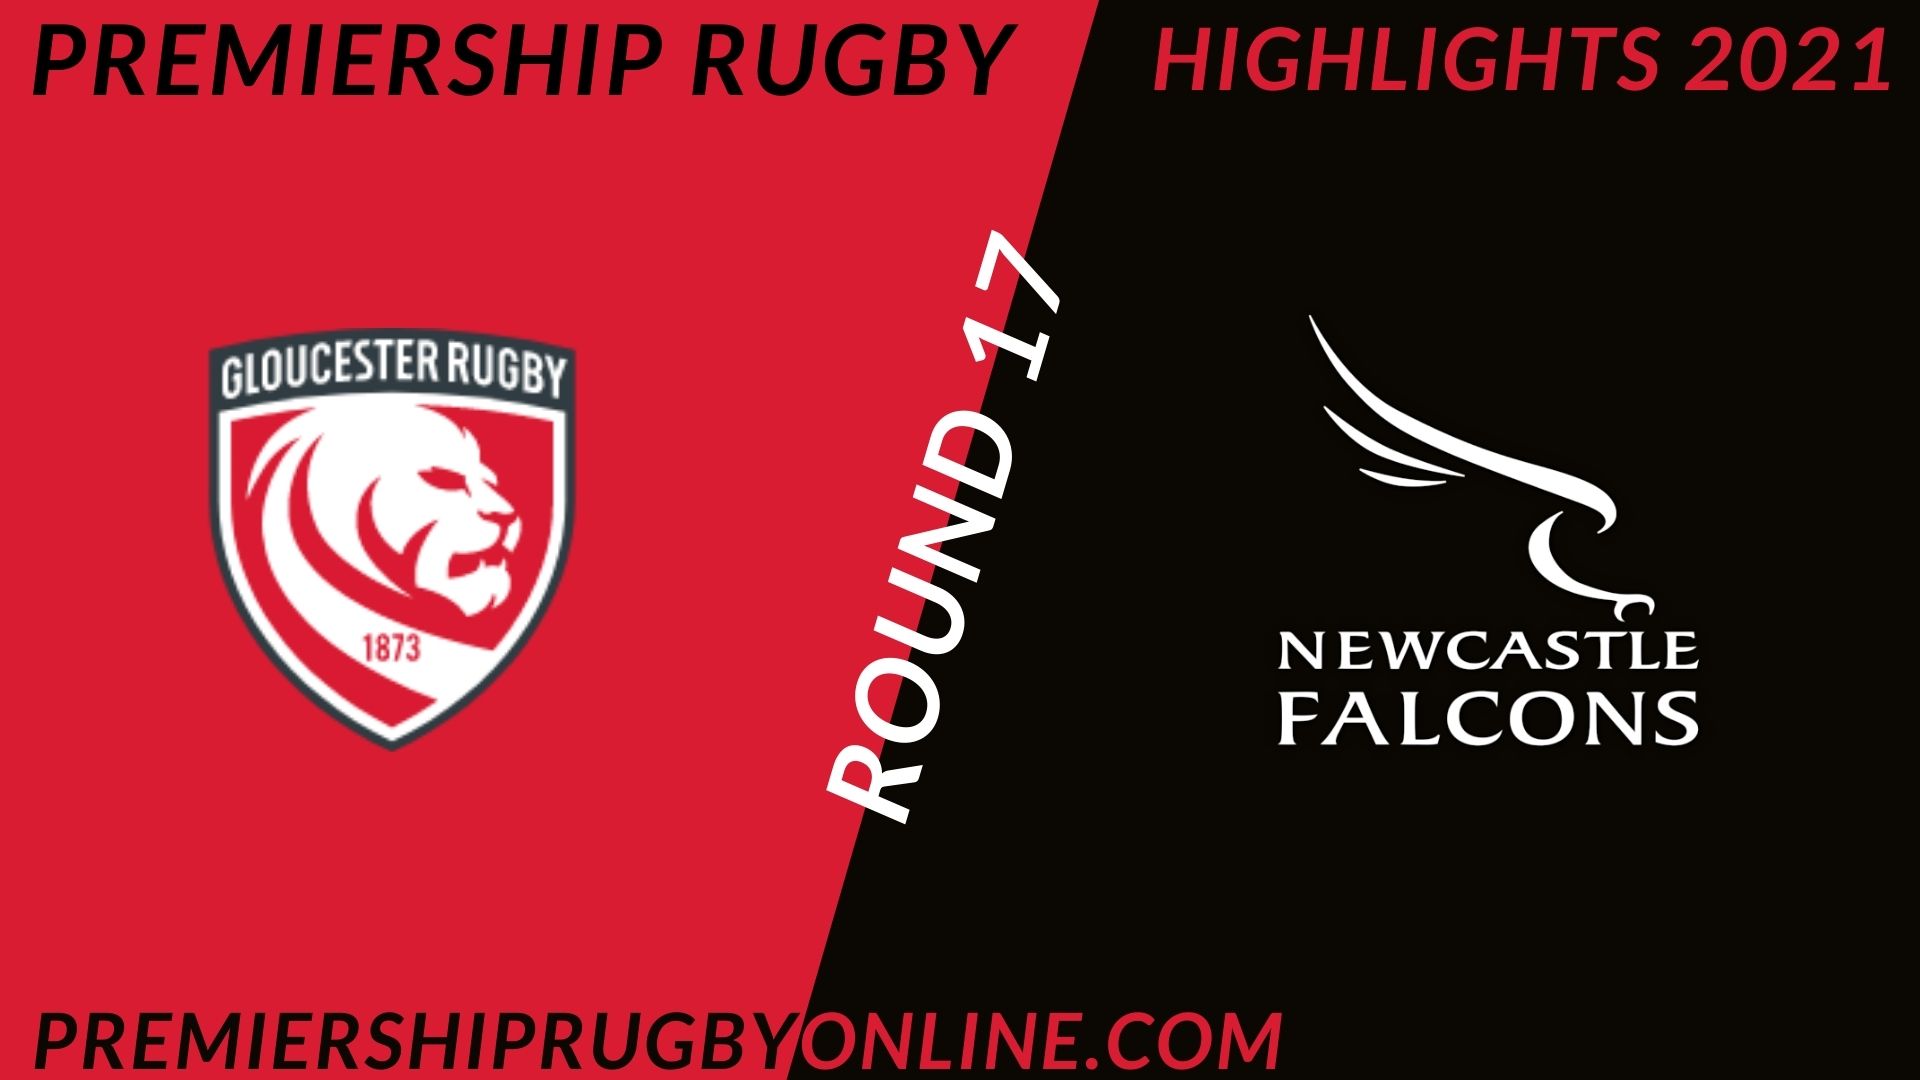 Gloucester Rugby Vs Newcastle Falcons Highlights 2021 RD 17